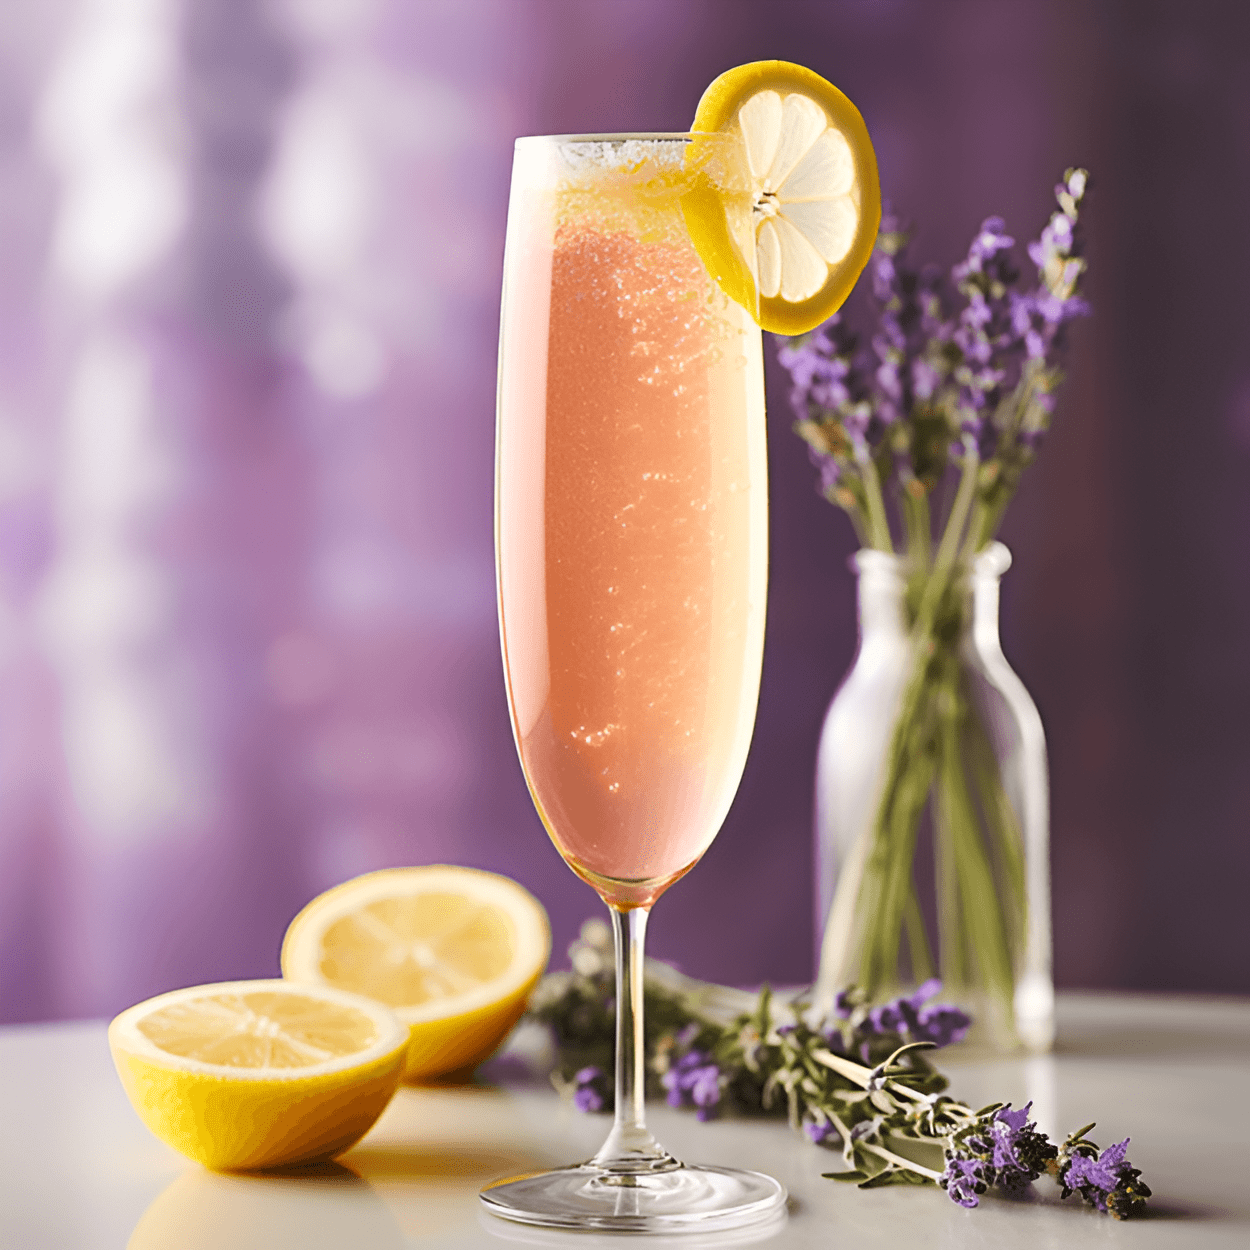 Lavender French 75 Cocktail Recipe - The Lavender French 75 is a refreshing, crisp, and bubbly cocktail. It has a strong citrusy tang from the lemon juice, balanced by the floral sweetness of the lavender syrup. The gin adds a botanical complexity, while the champagne brings a light, effervescent finish.